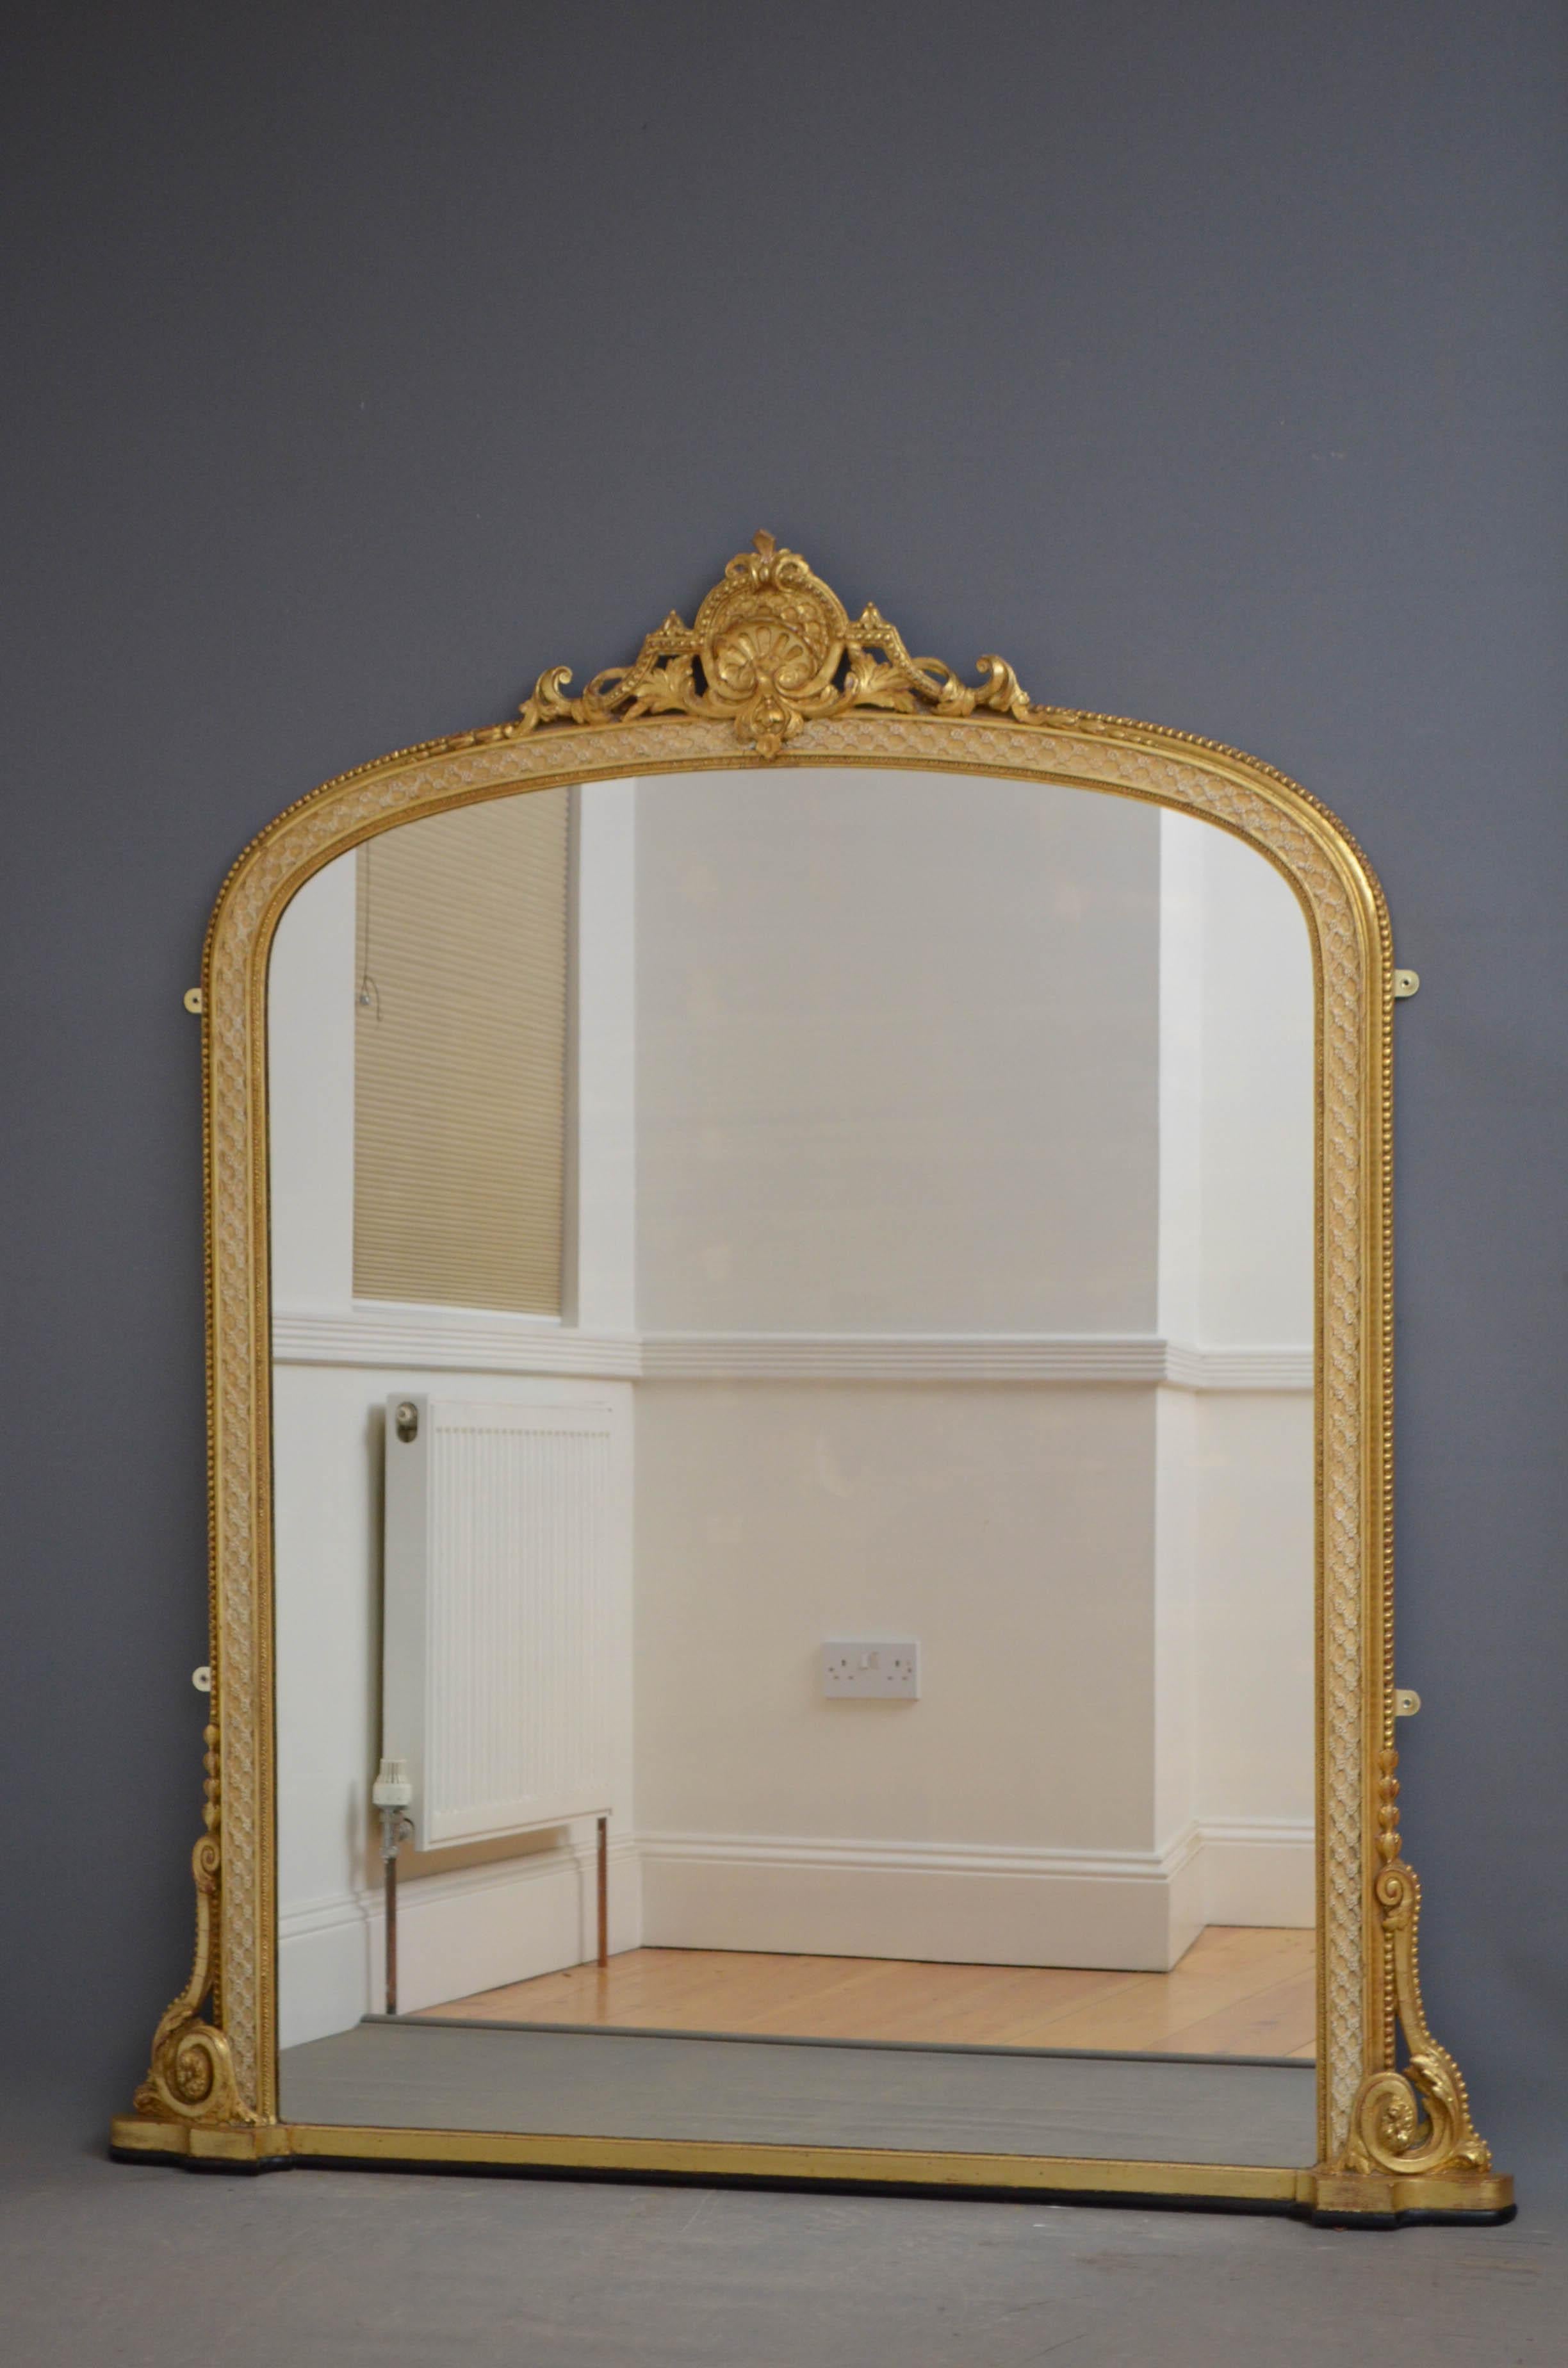 K0469, a rare pair of Victorian giltwood wall mirrors, each having arched glass, one being original with some imperfections, other a replacement in carved frame with side scrolls and centre crest to the top (possibly a later addition). Each mirror